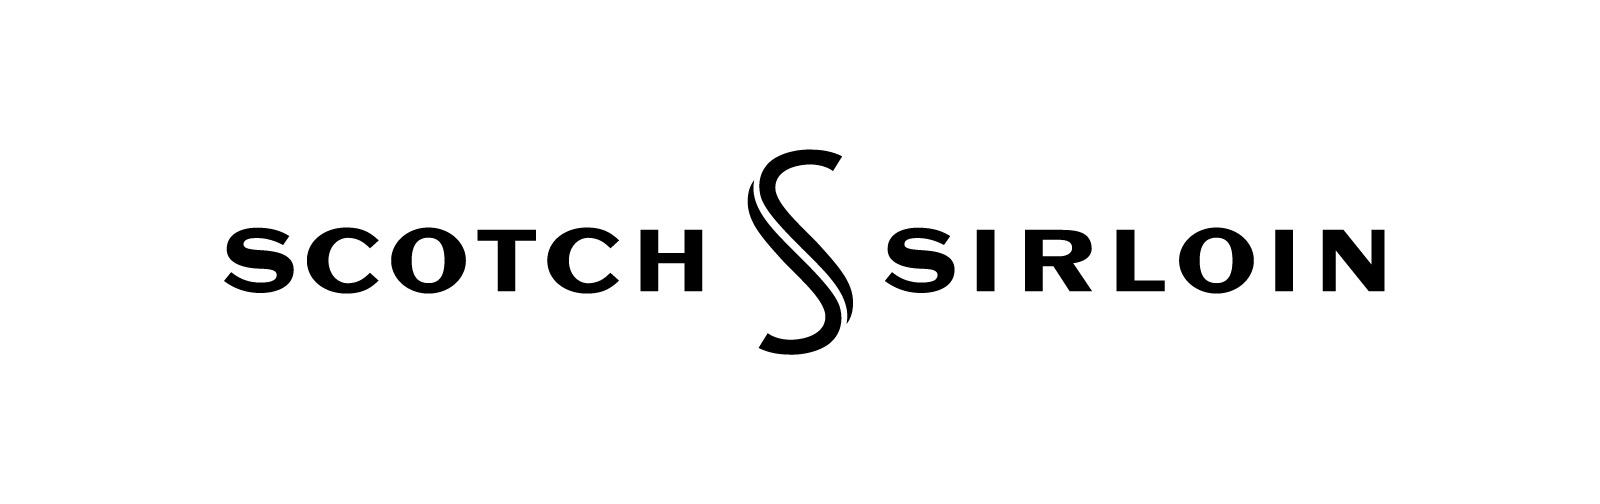 Brand Logo of The Scotch and Sirloin, black on white background